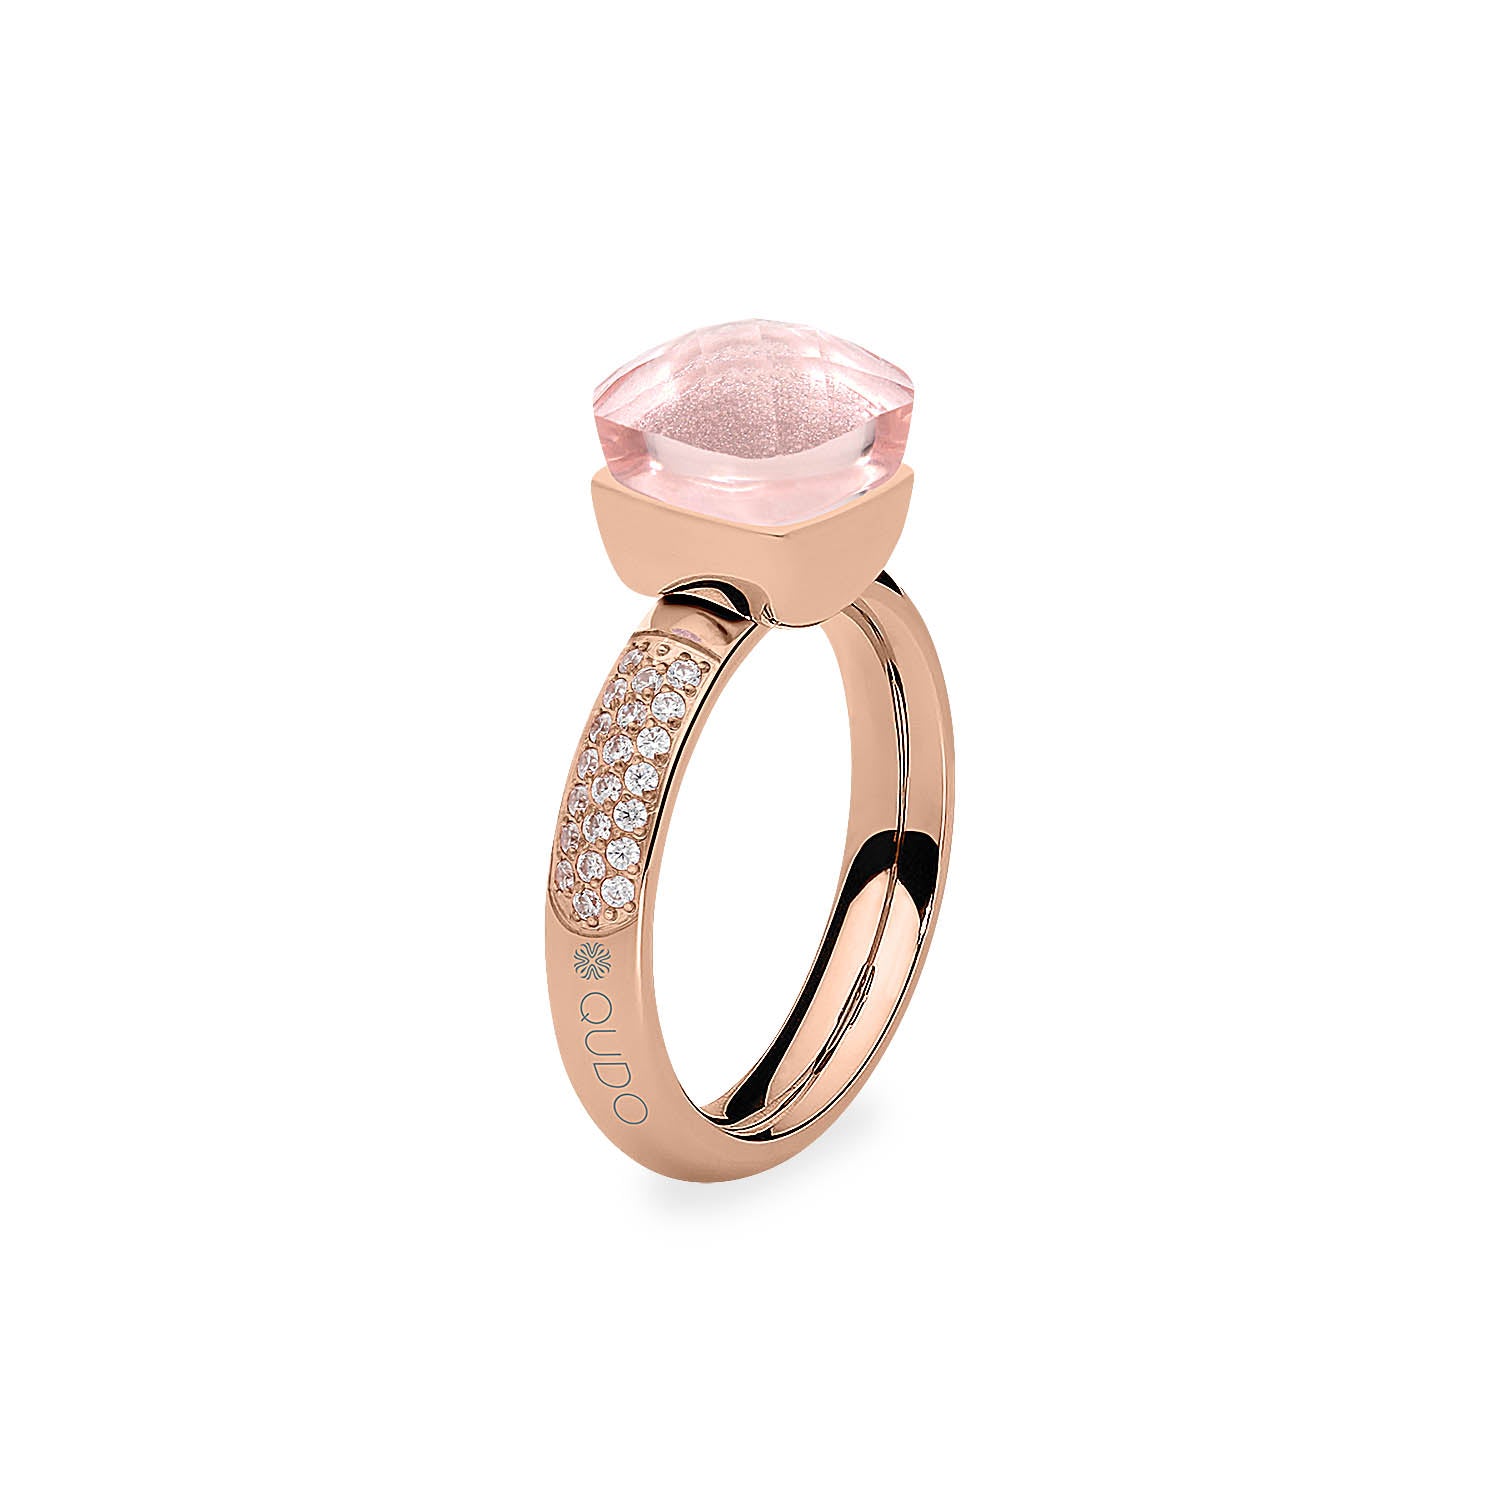 Firenze Deluxe Ring - Shades of Rose & Grey - Roségold